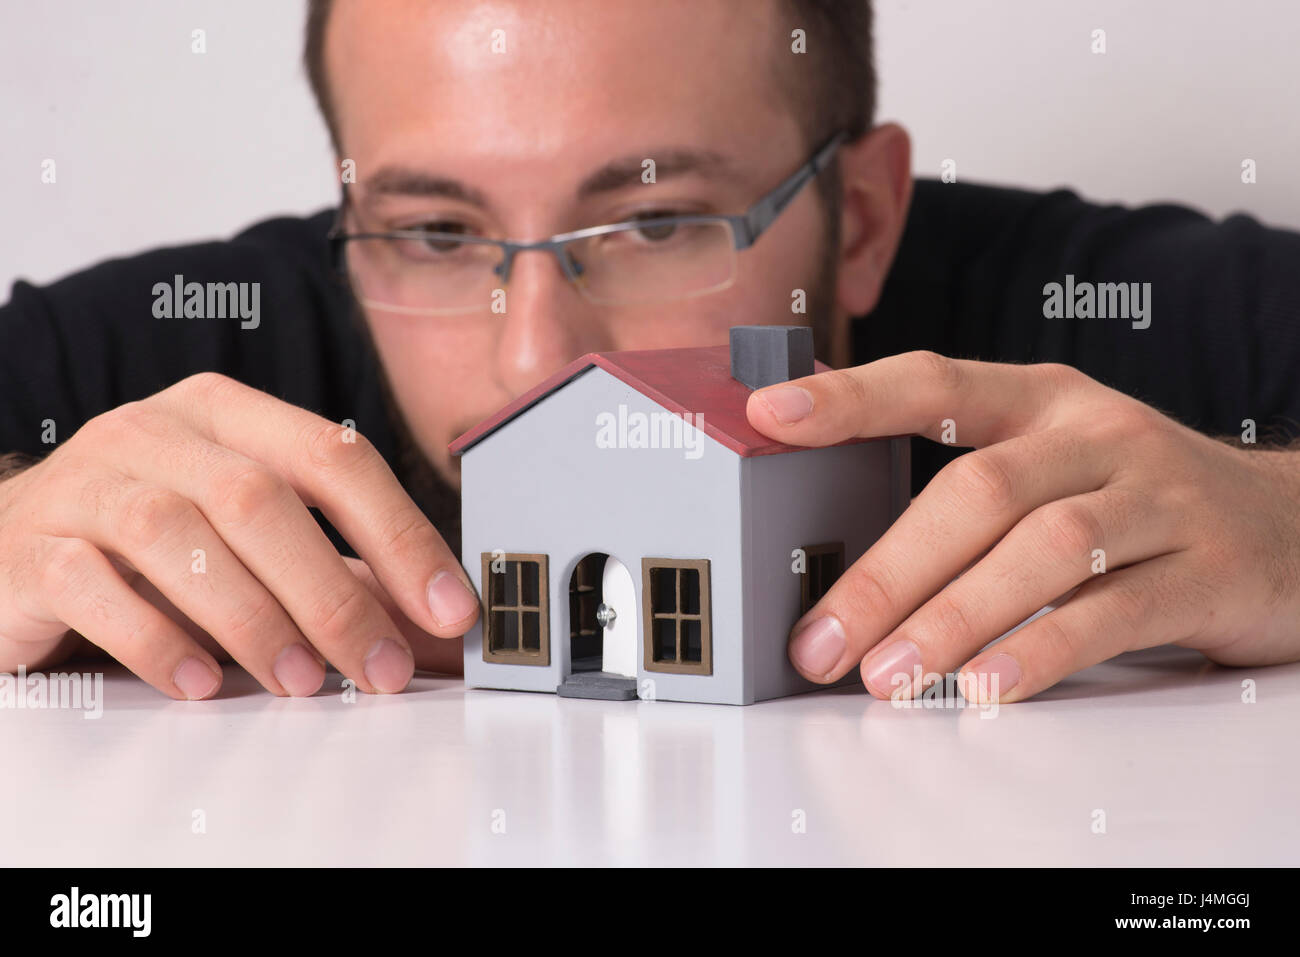 Man taking a close look at the model house on a white background. Stock Photo